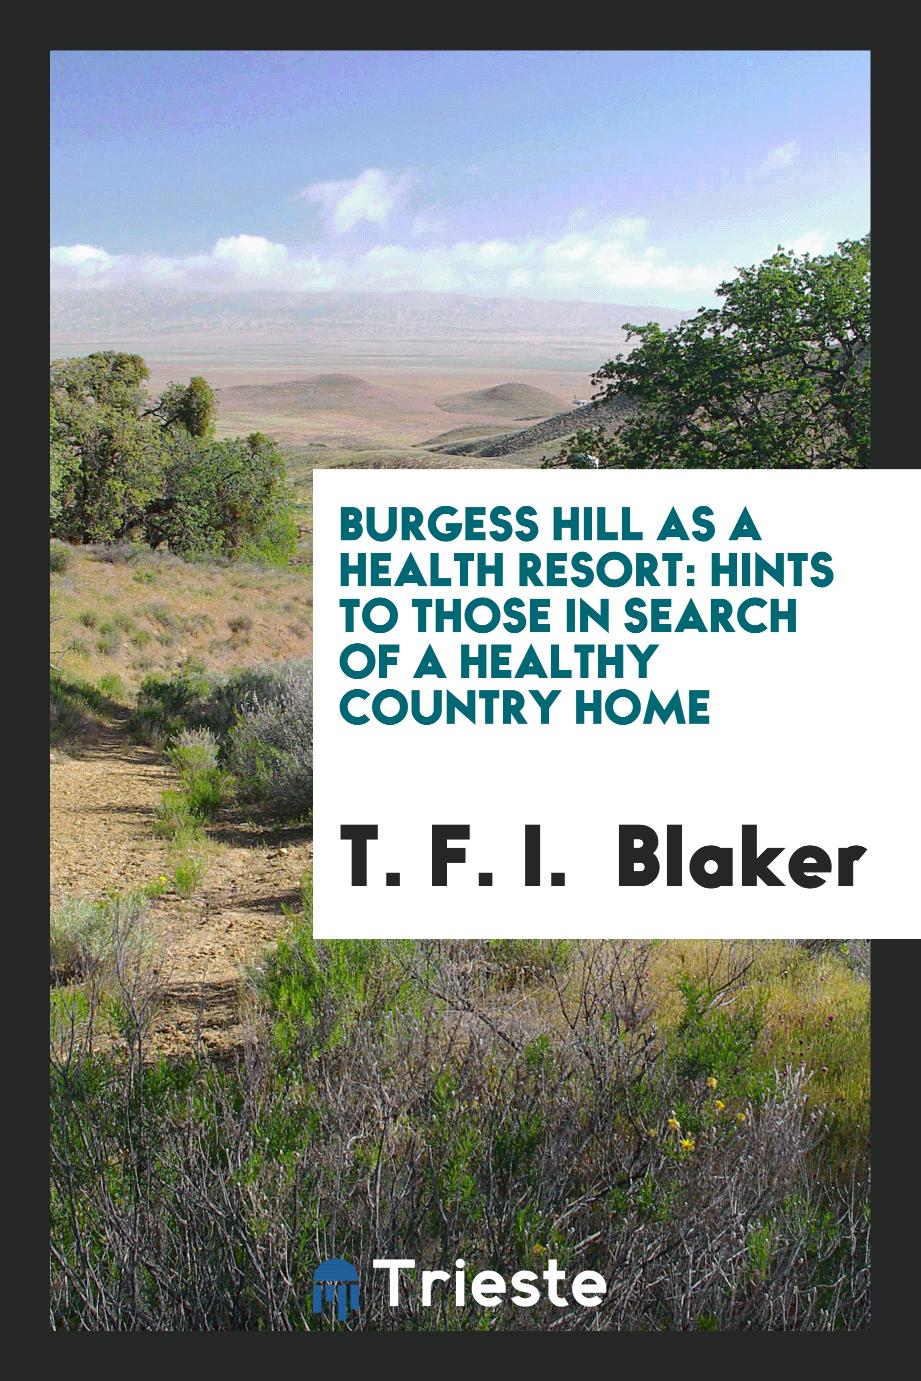 Burgess Hill as a health resort: Hints to Those in Search of a Healthy Country Home